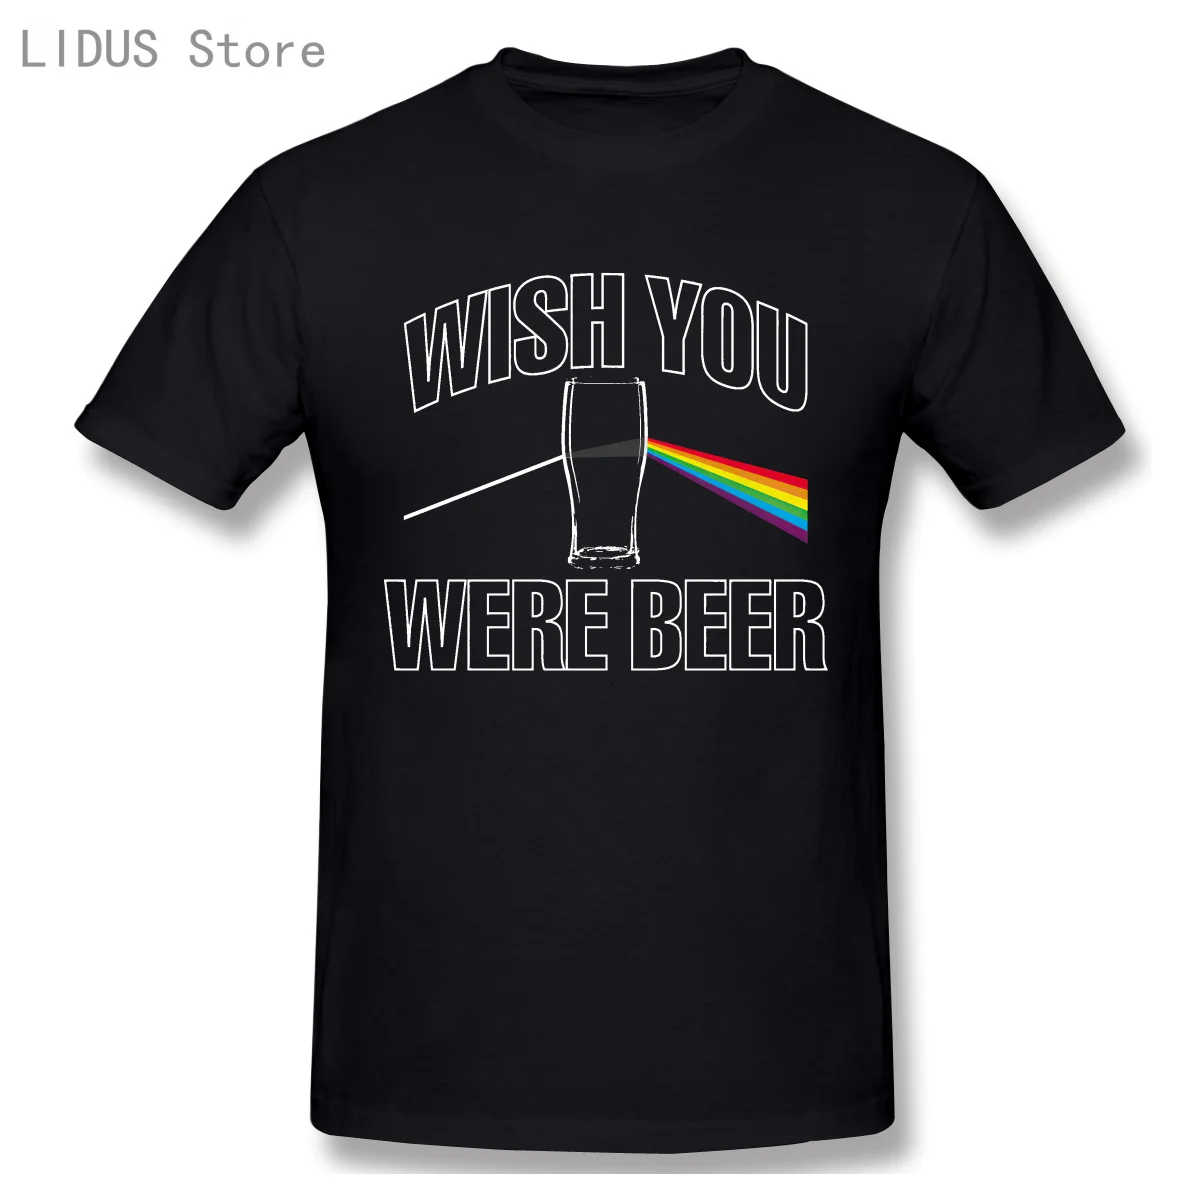 

Wish You Were Beer Funny Mens T Shirt - Real Ale Home Brew Gift Dad Birthday